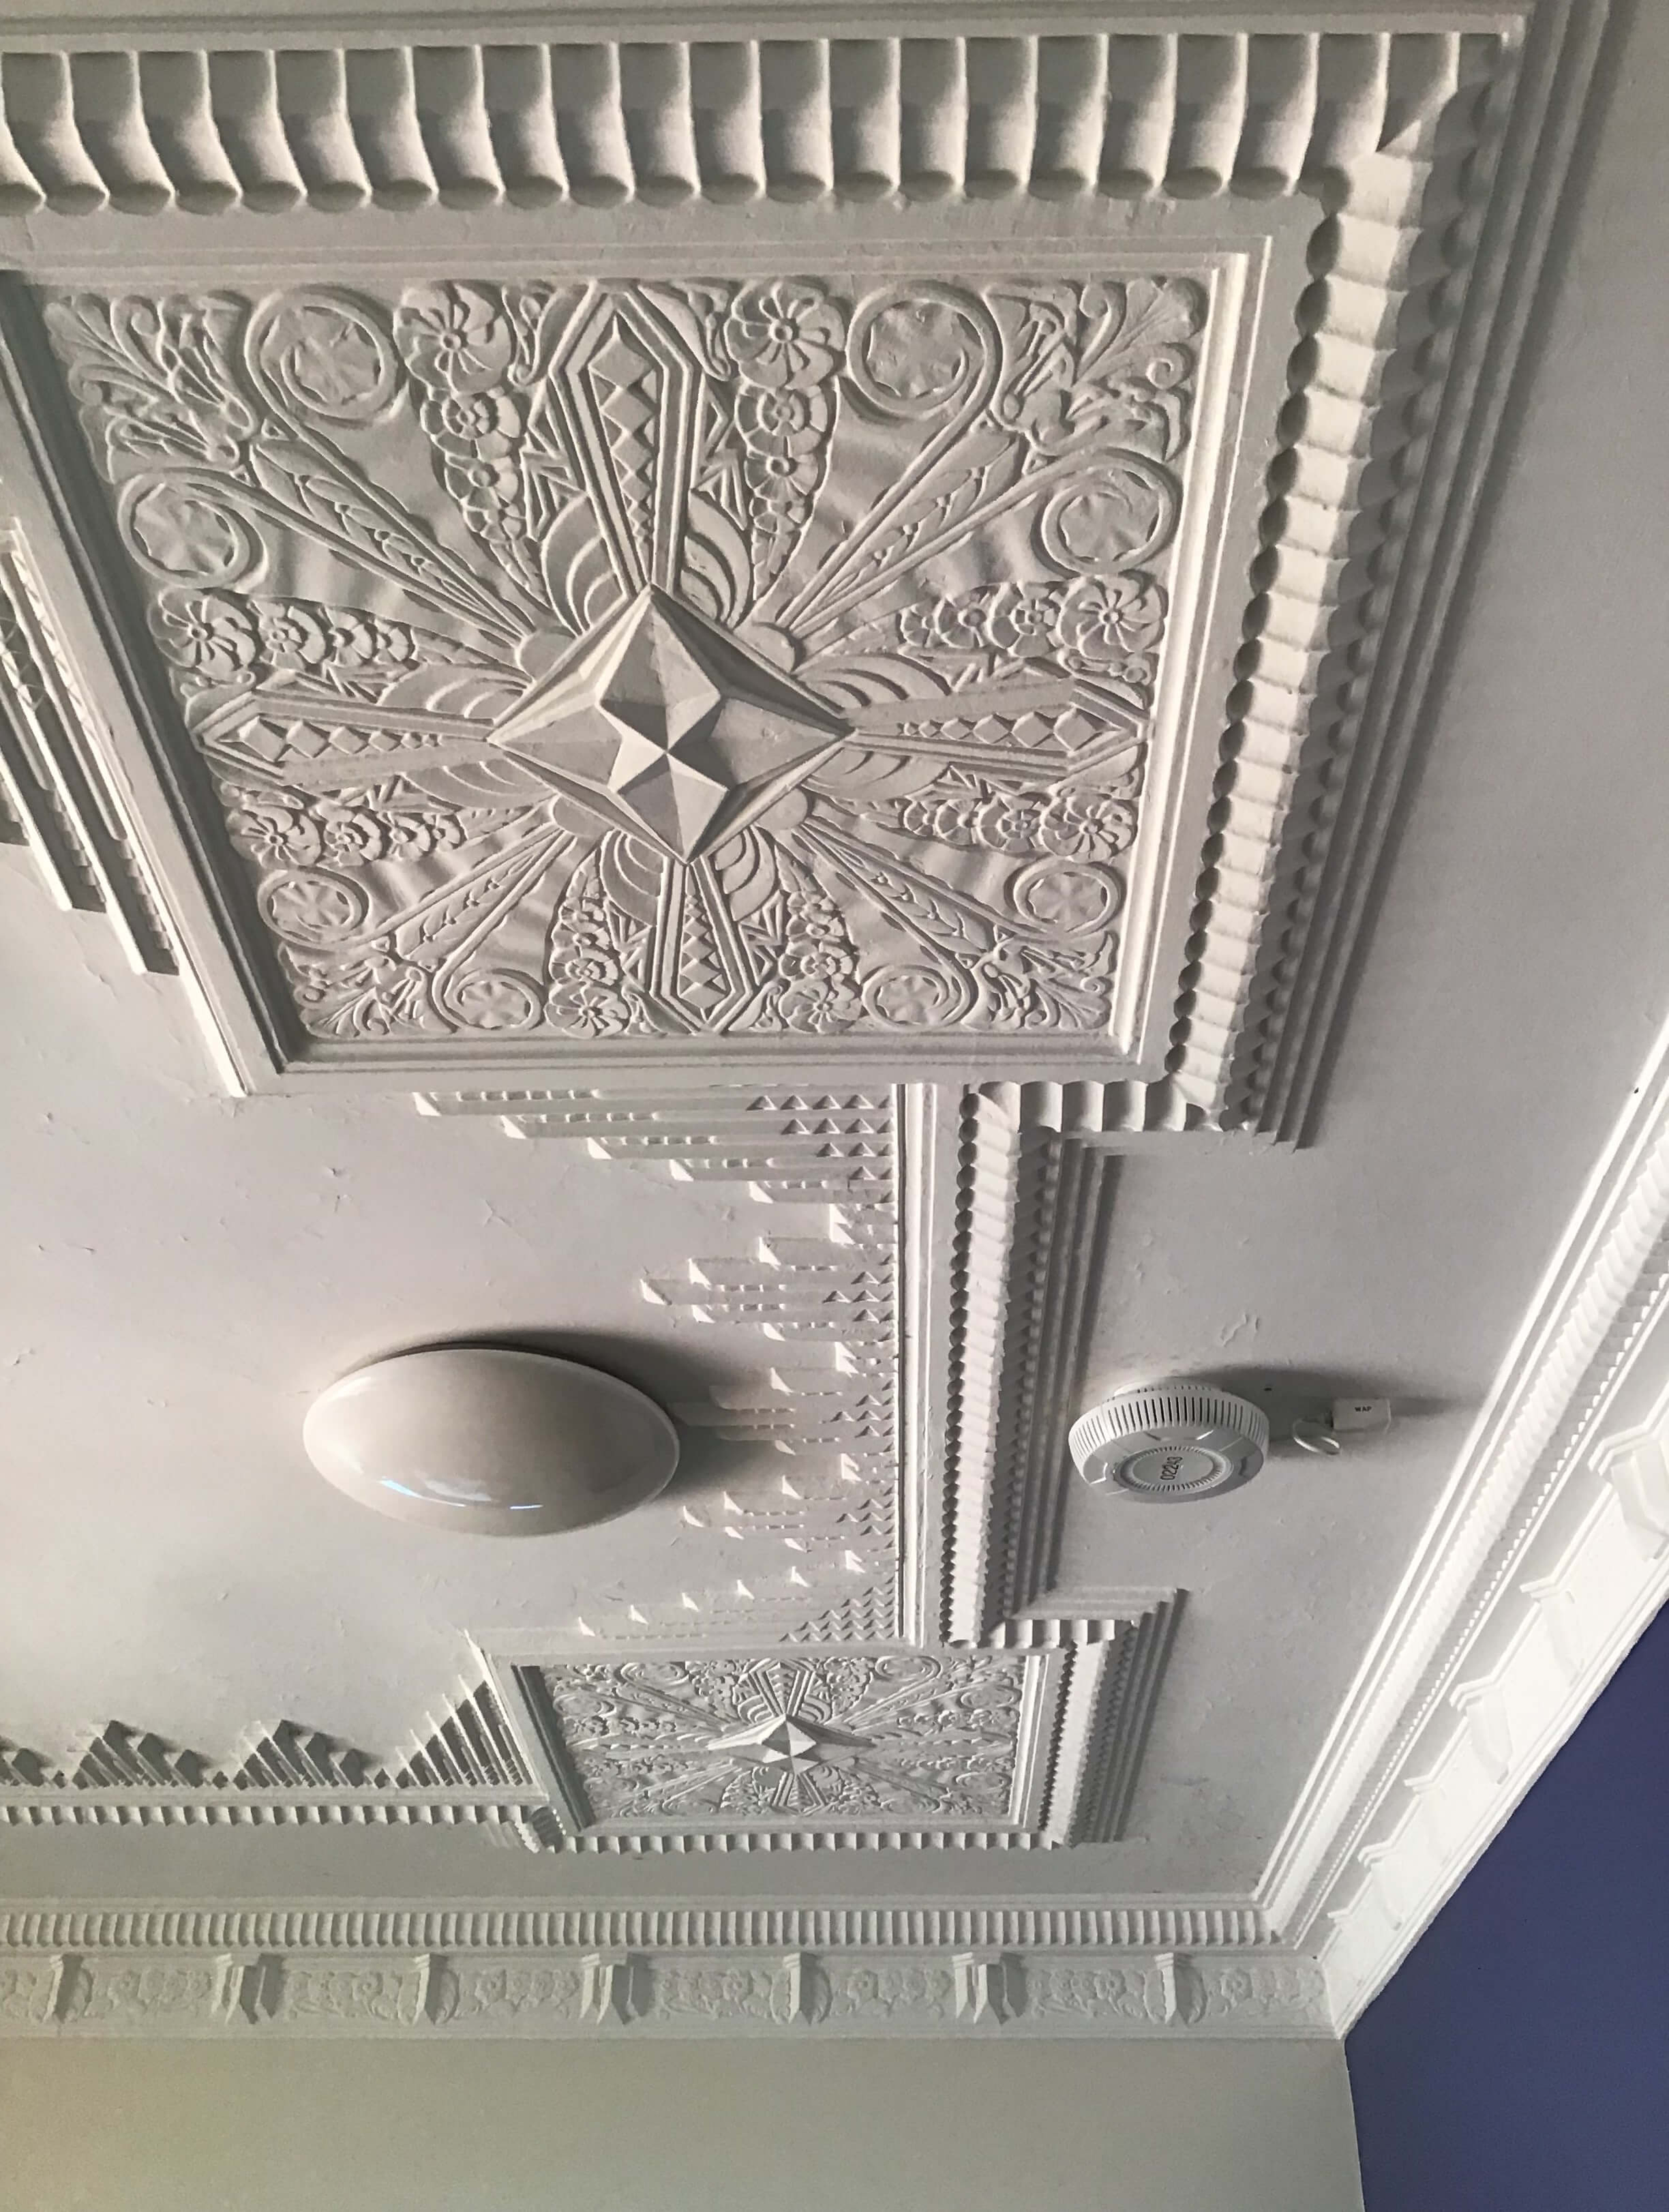 completed building maintenance in Brisbane view of detail of heritage-protected moulded plaster on white ceiling next to smoke detector and light fixture